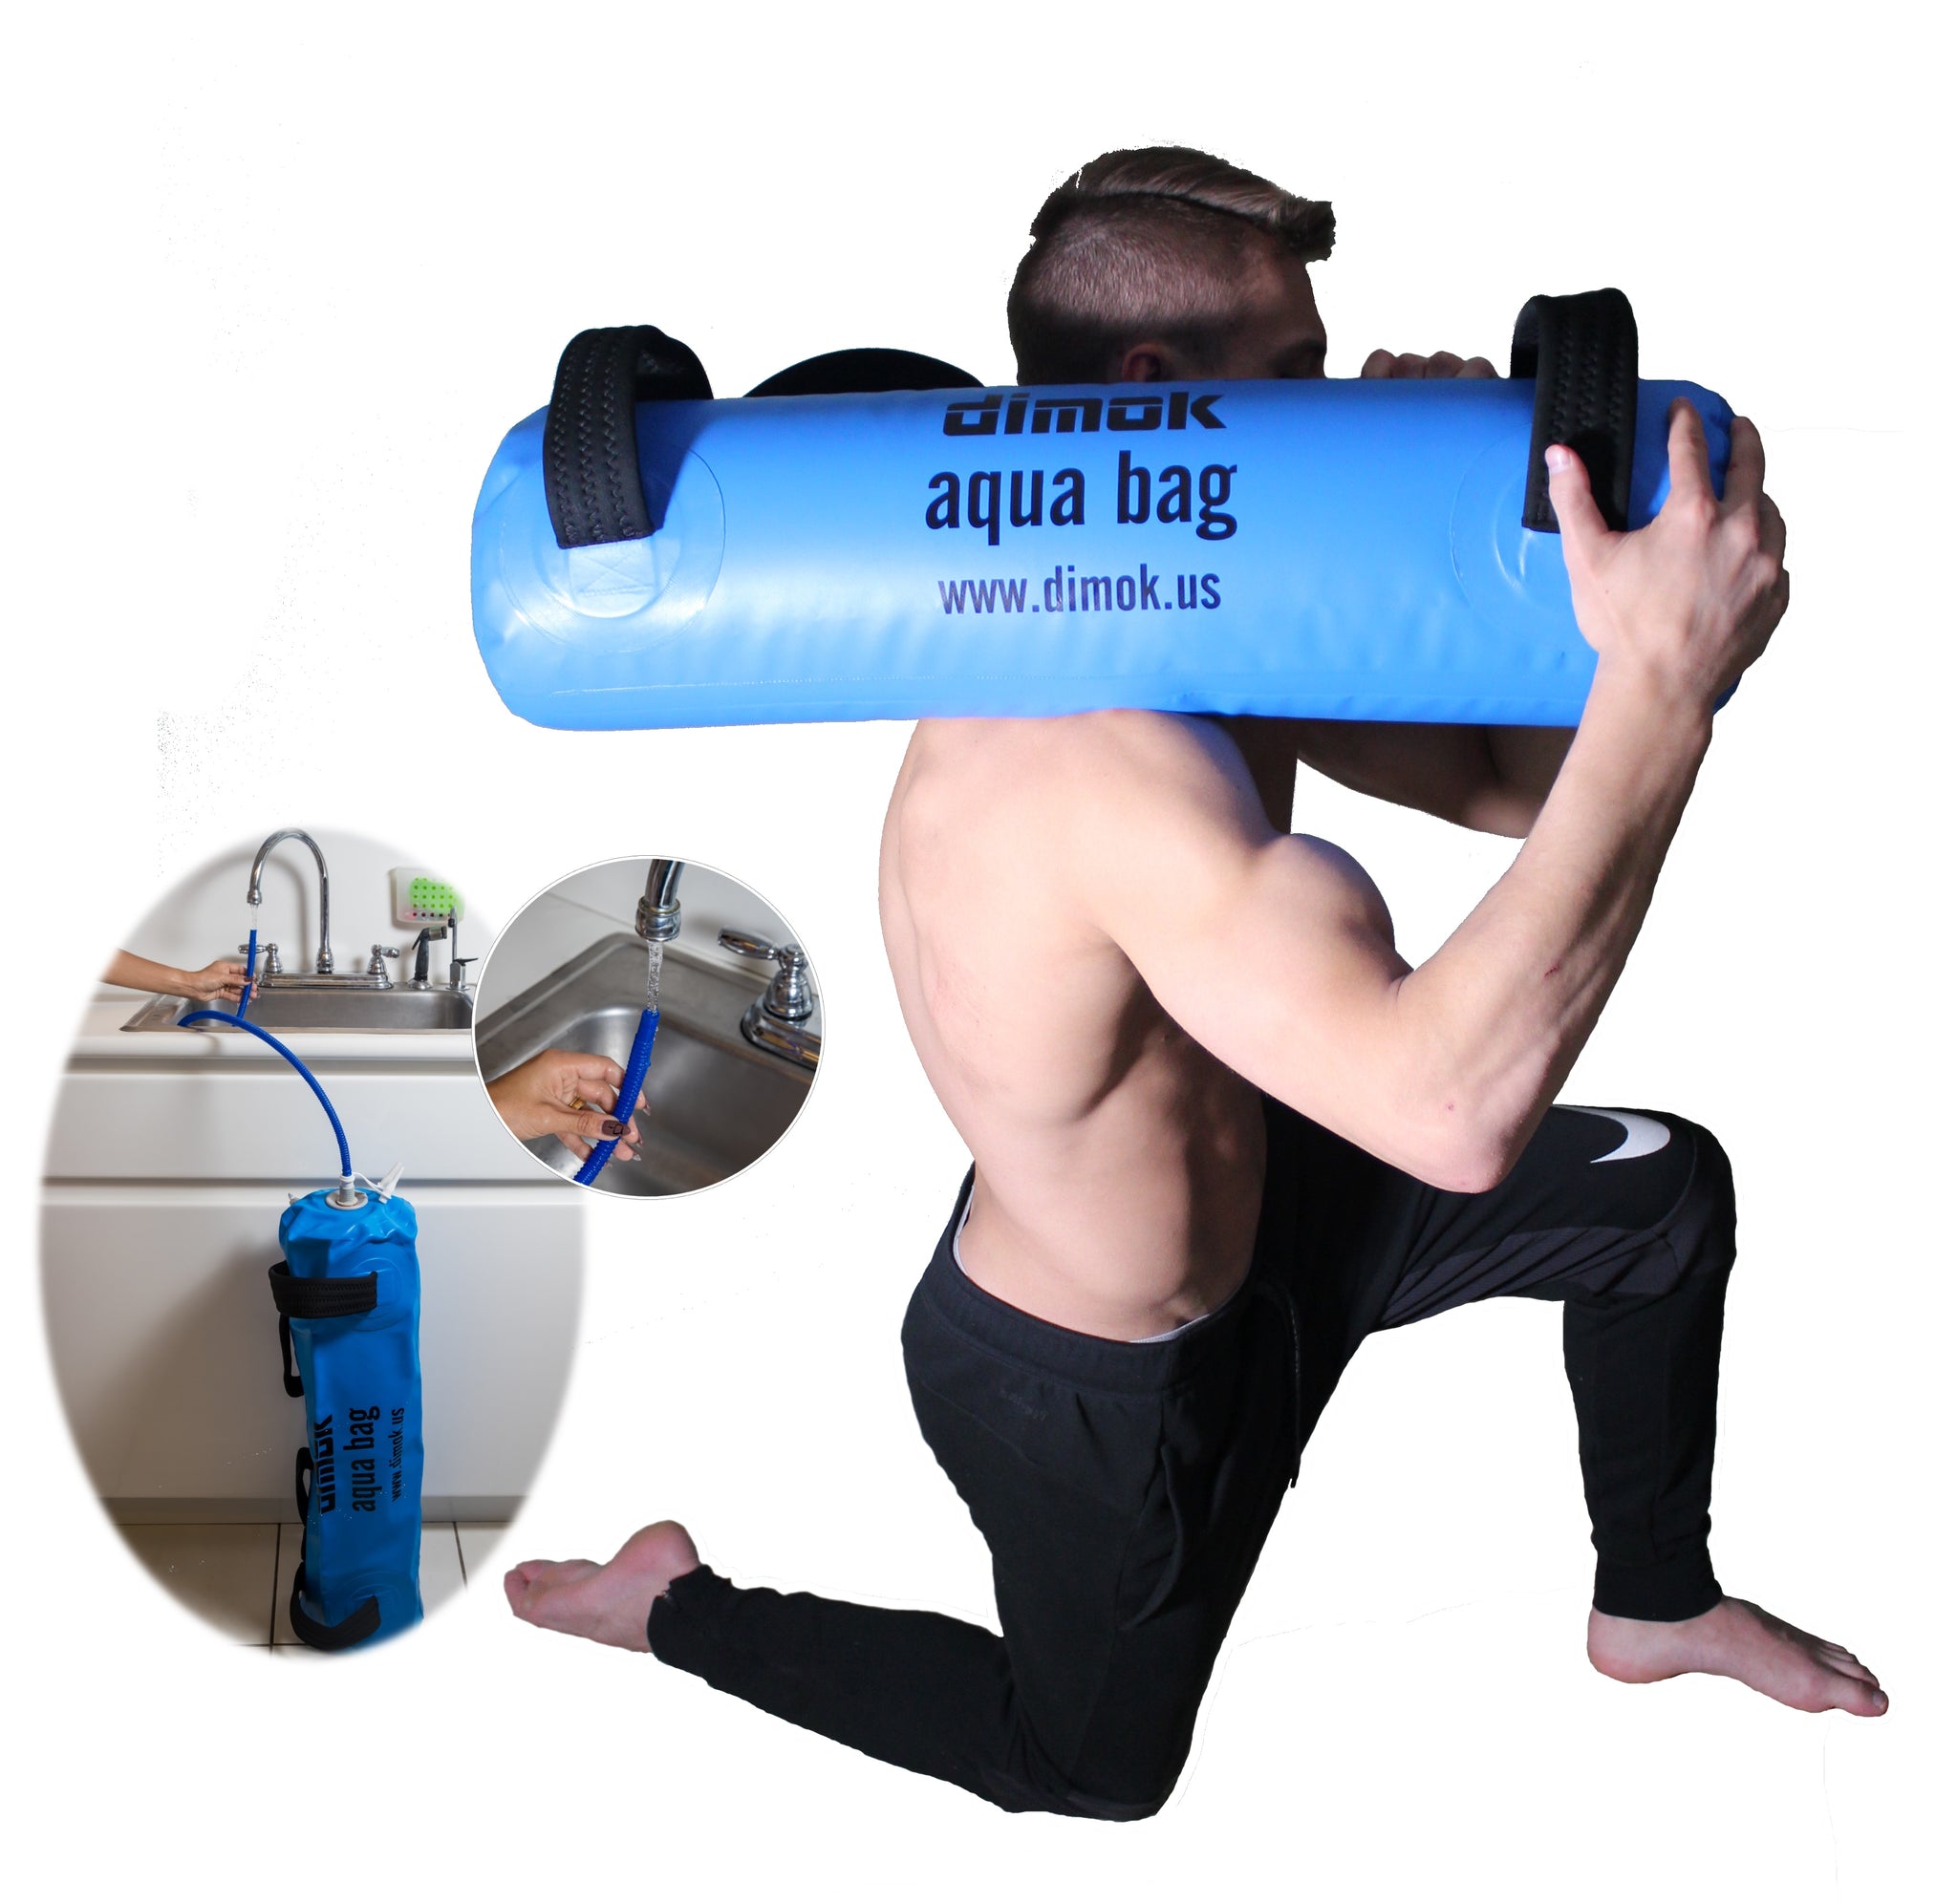 How to Build Your Own Home Workout Sandbag